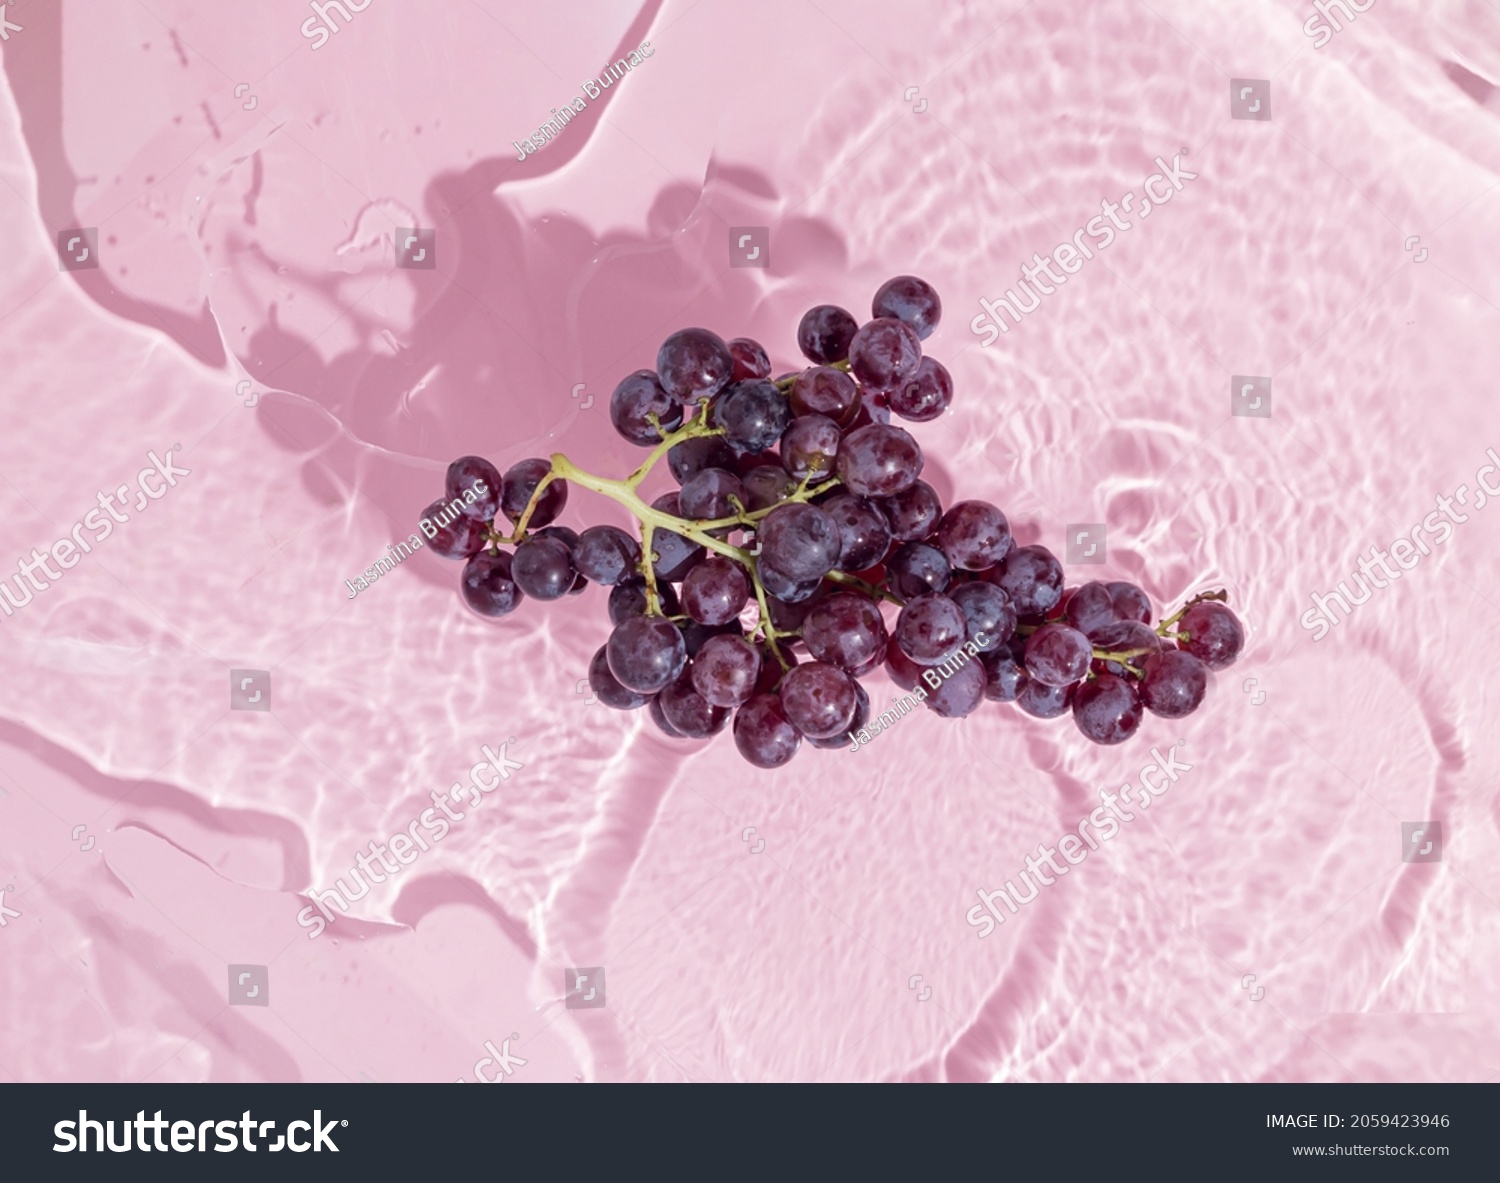 Black muscat grapes in water on pastel pink background. Natural beauty of agriculture. Creative concept of healthy food or fruit juice rich in vitamins and antioxidant resveratrol. Minimal flat lay. #2059423946